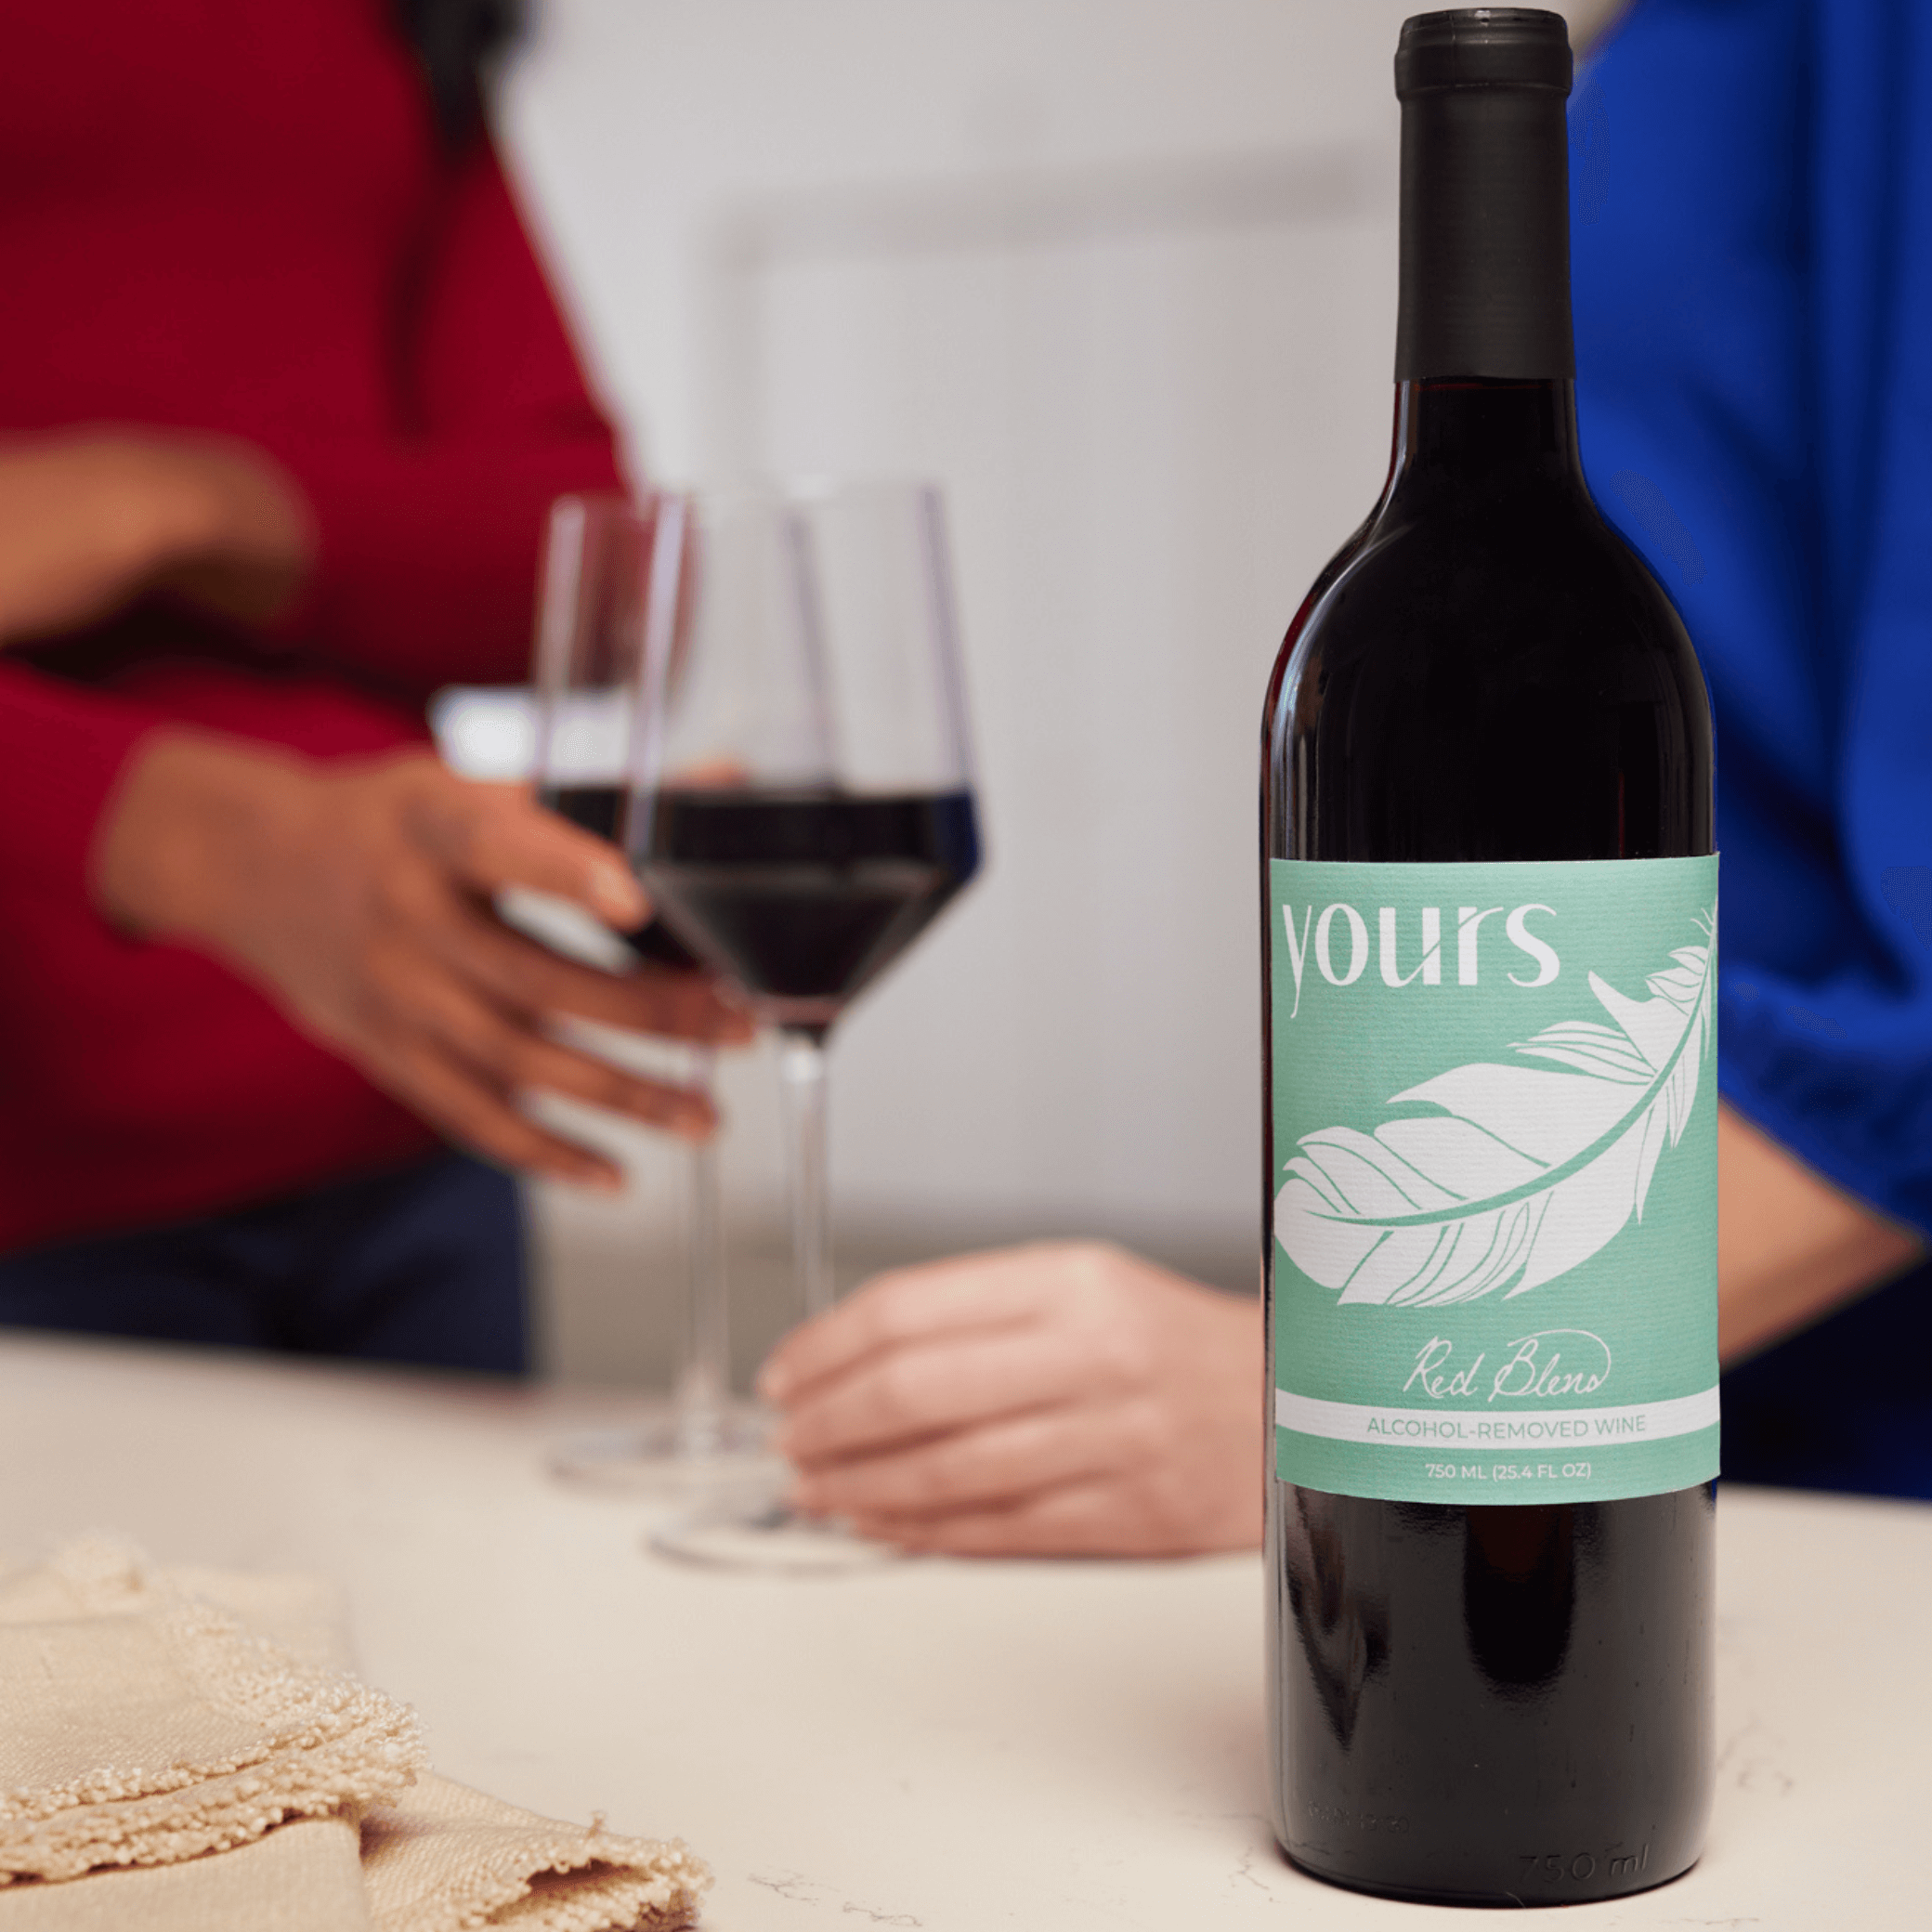 YOURS Non-Alcoholic Award Winning California Red Blend Wine On Table